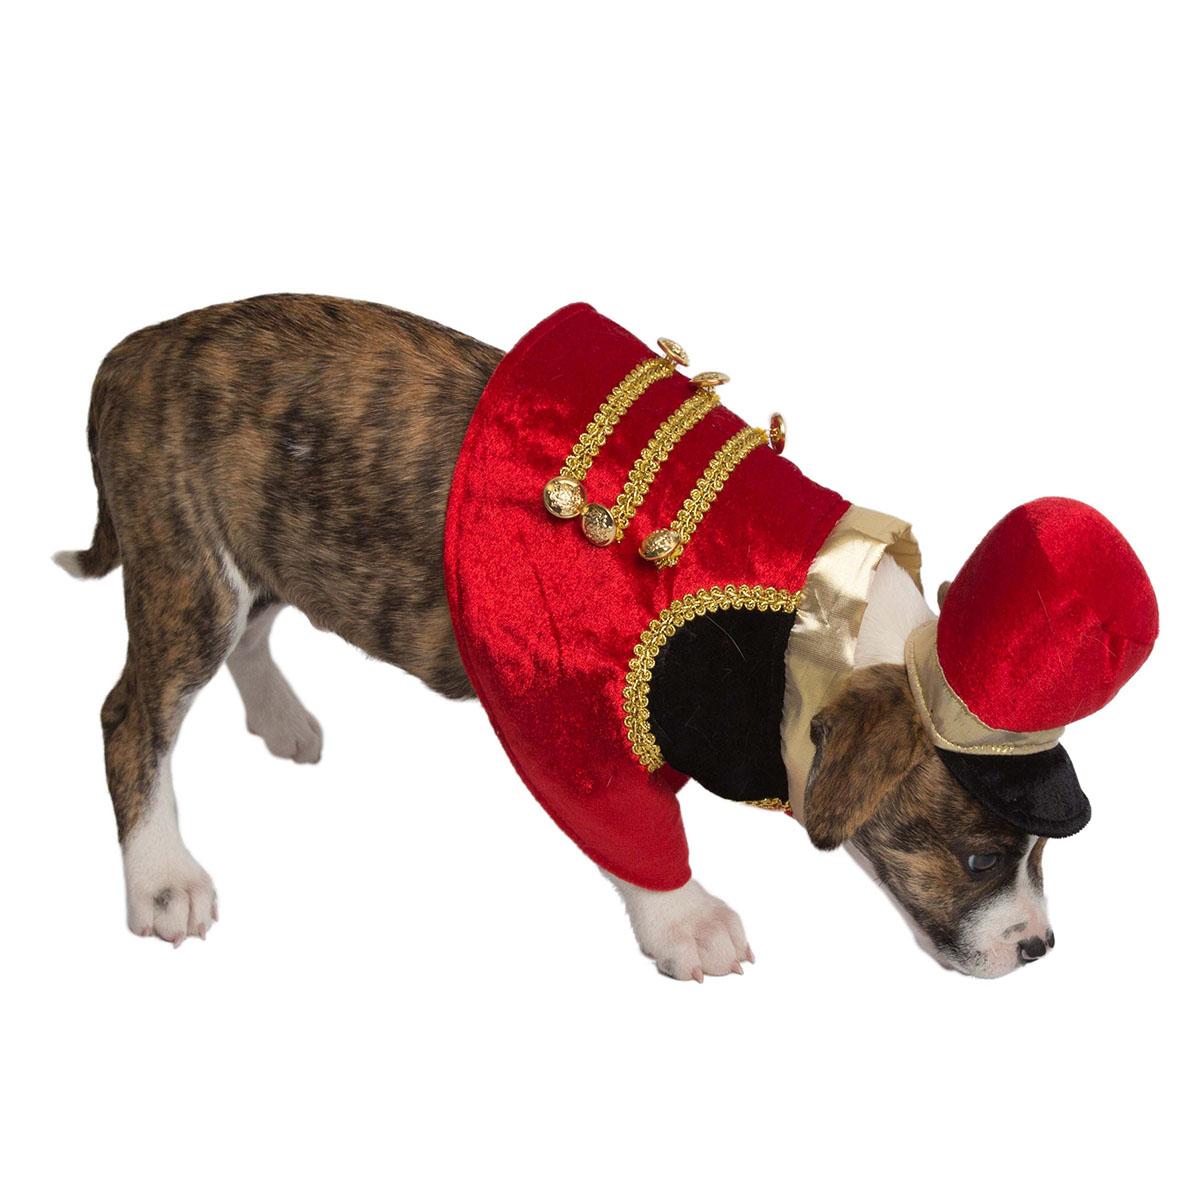 Pet Krewe Holiday Nutcracker Soldier Costume for Dogs